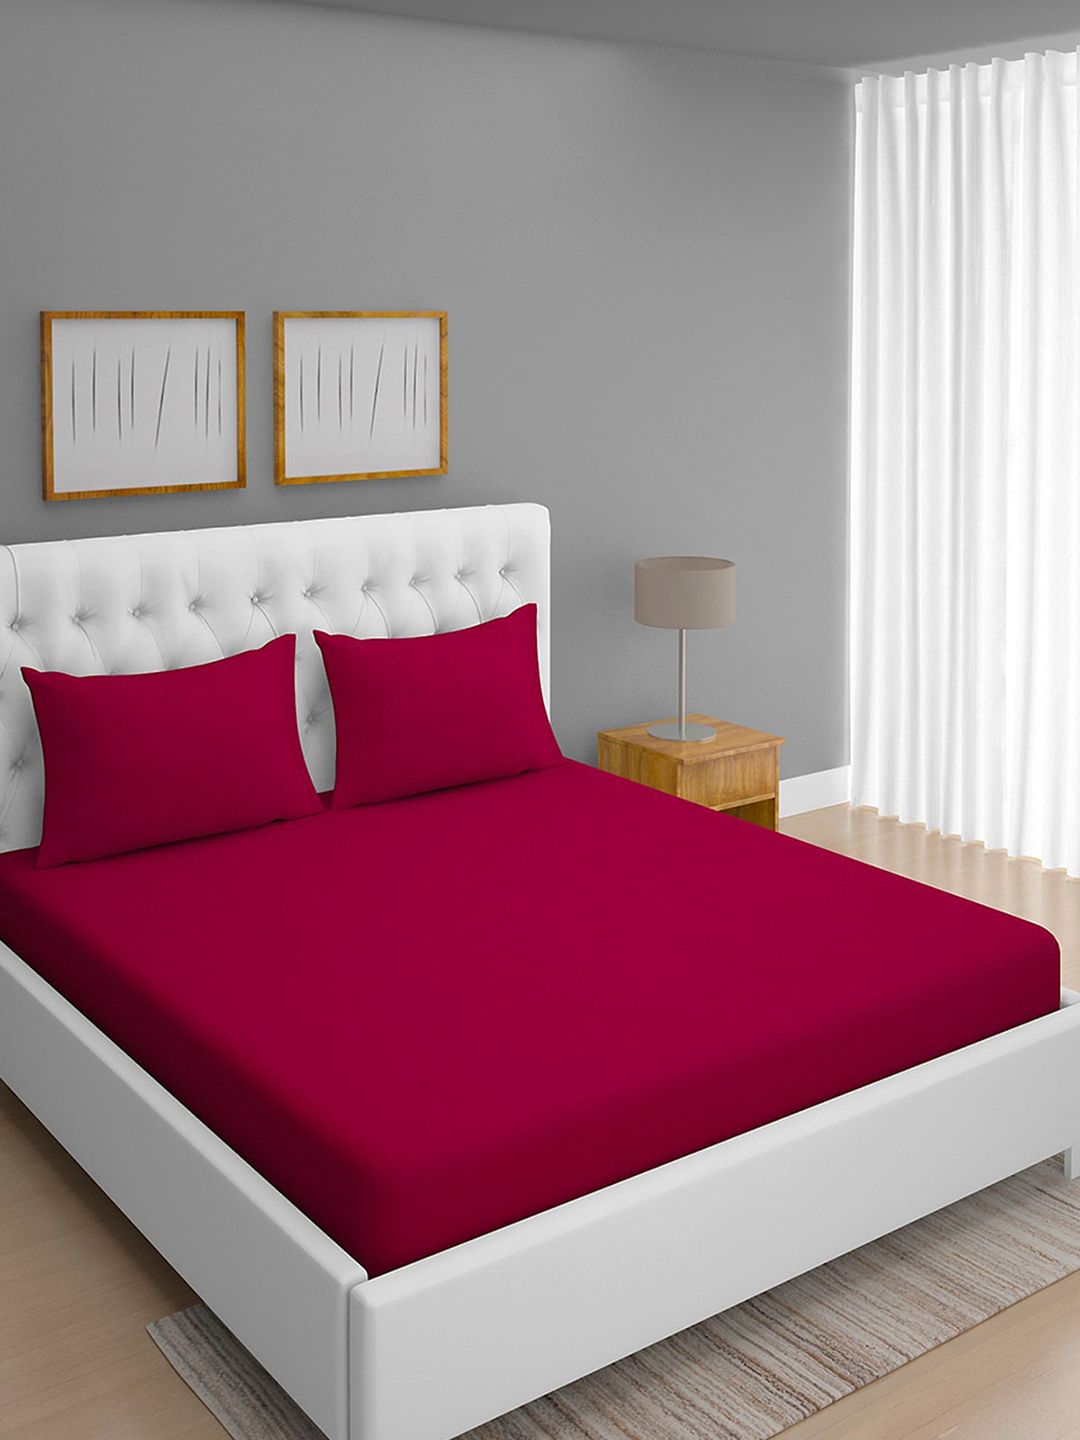 ROMEE Maroon 400 TC Queen Bedsheet with 2 Pillow Covers Price in India